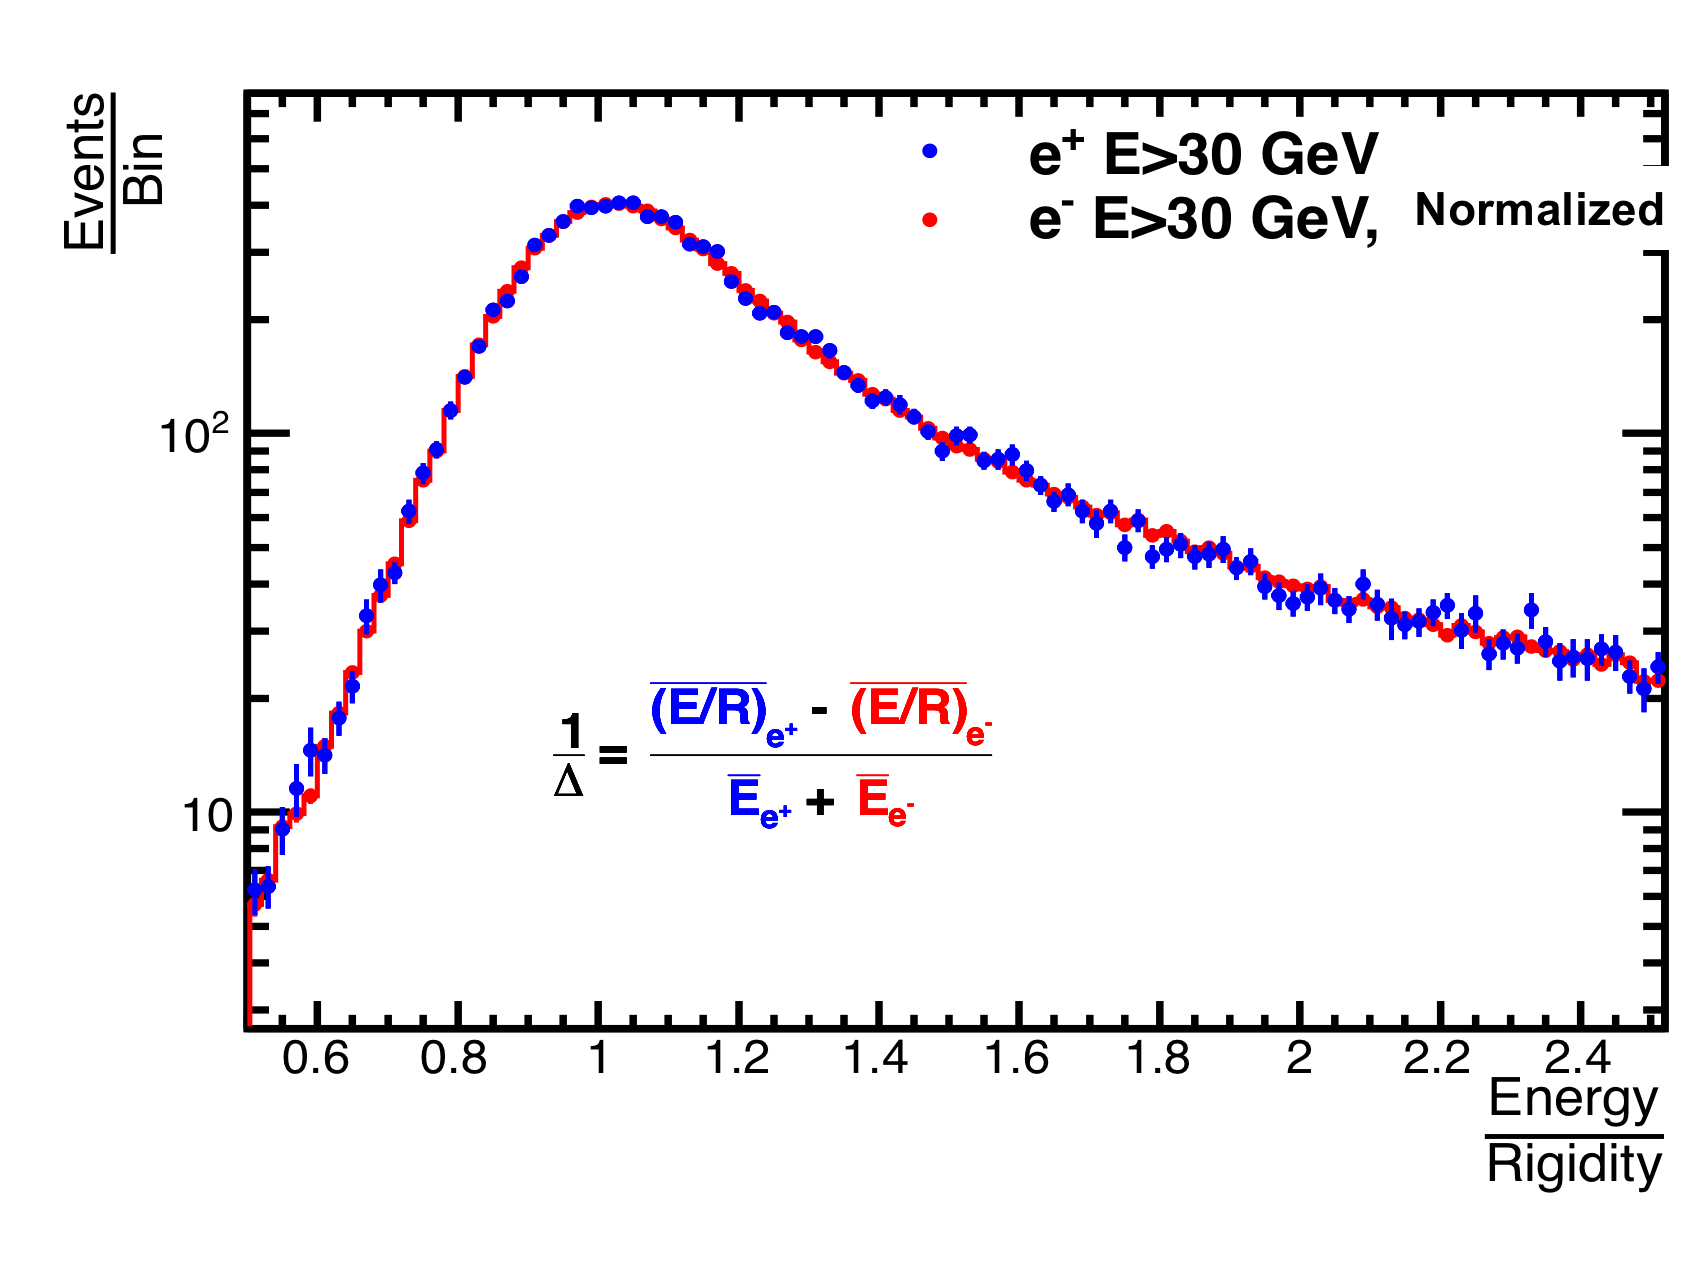 Comparison of the Energy/Rigidity ratio distributions for positrons and electrons